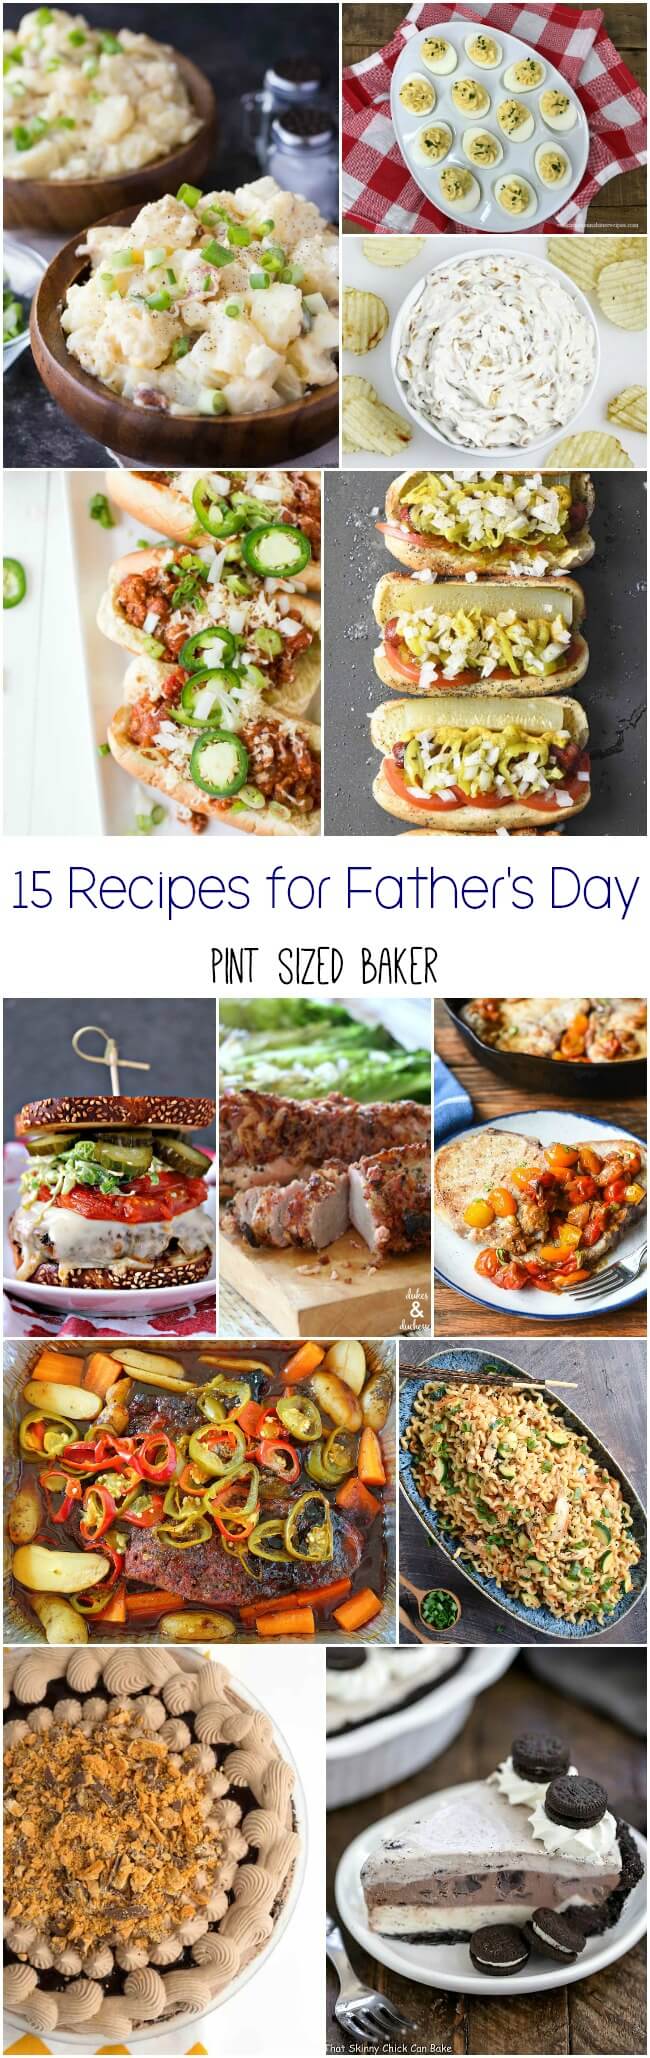 15 great Recipes for Father's Day. These recipes are also perfect for summer BBQ's and potluck parties with the neighbors. 